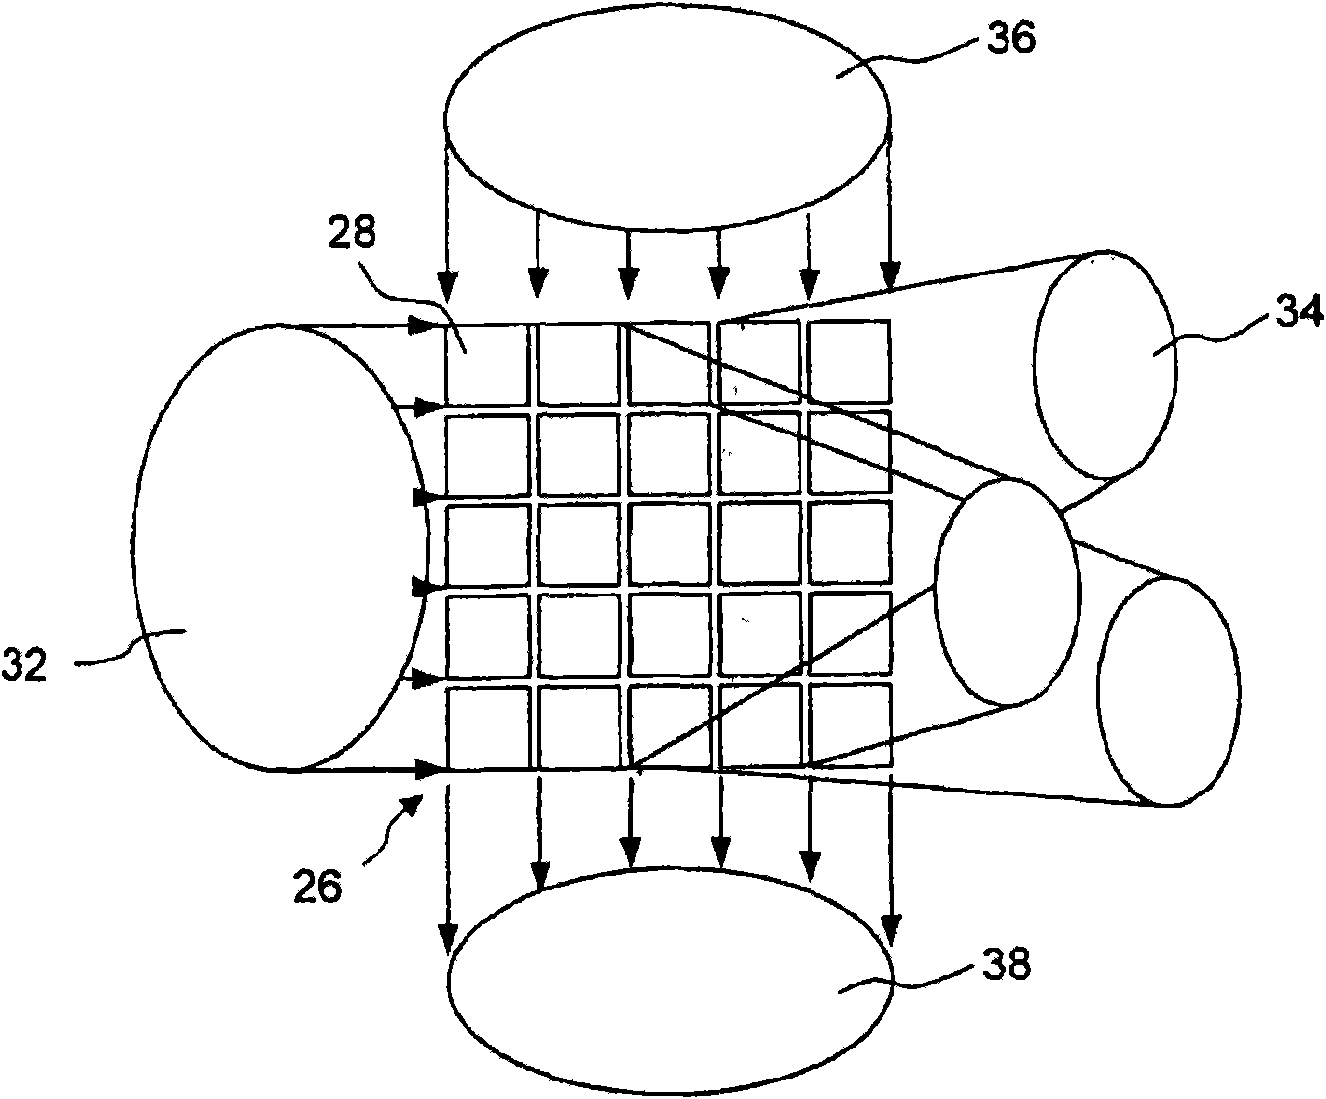 Method and device for monitoring multiple mirror arrays in an illumination system of a microlithographic projection exposure apparatus